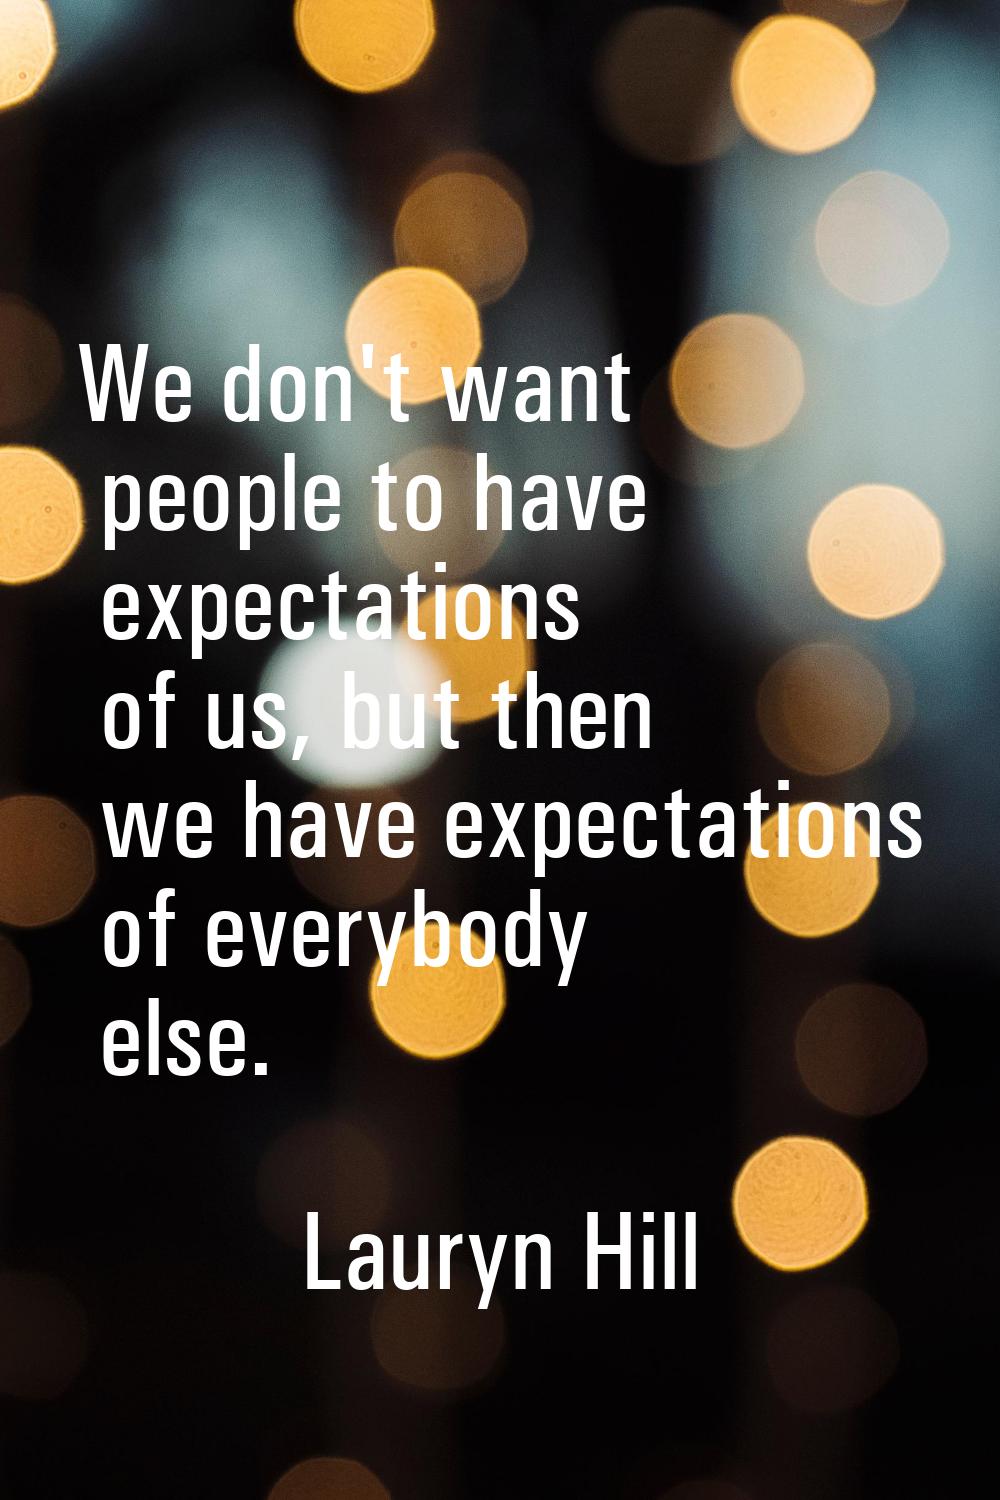 We don't want people to have expectations of us, but then we have expectations of everybody else.